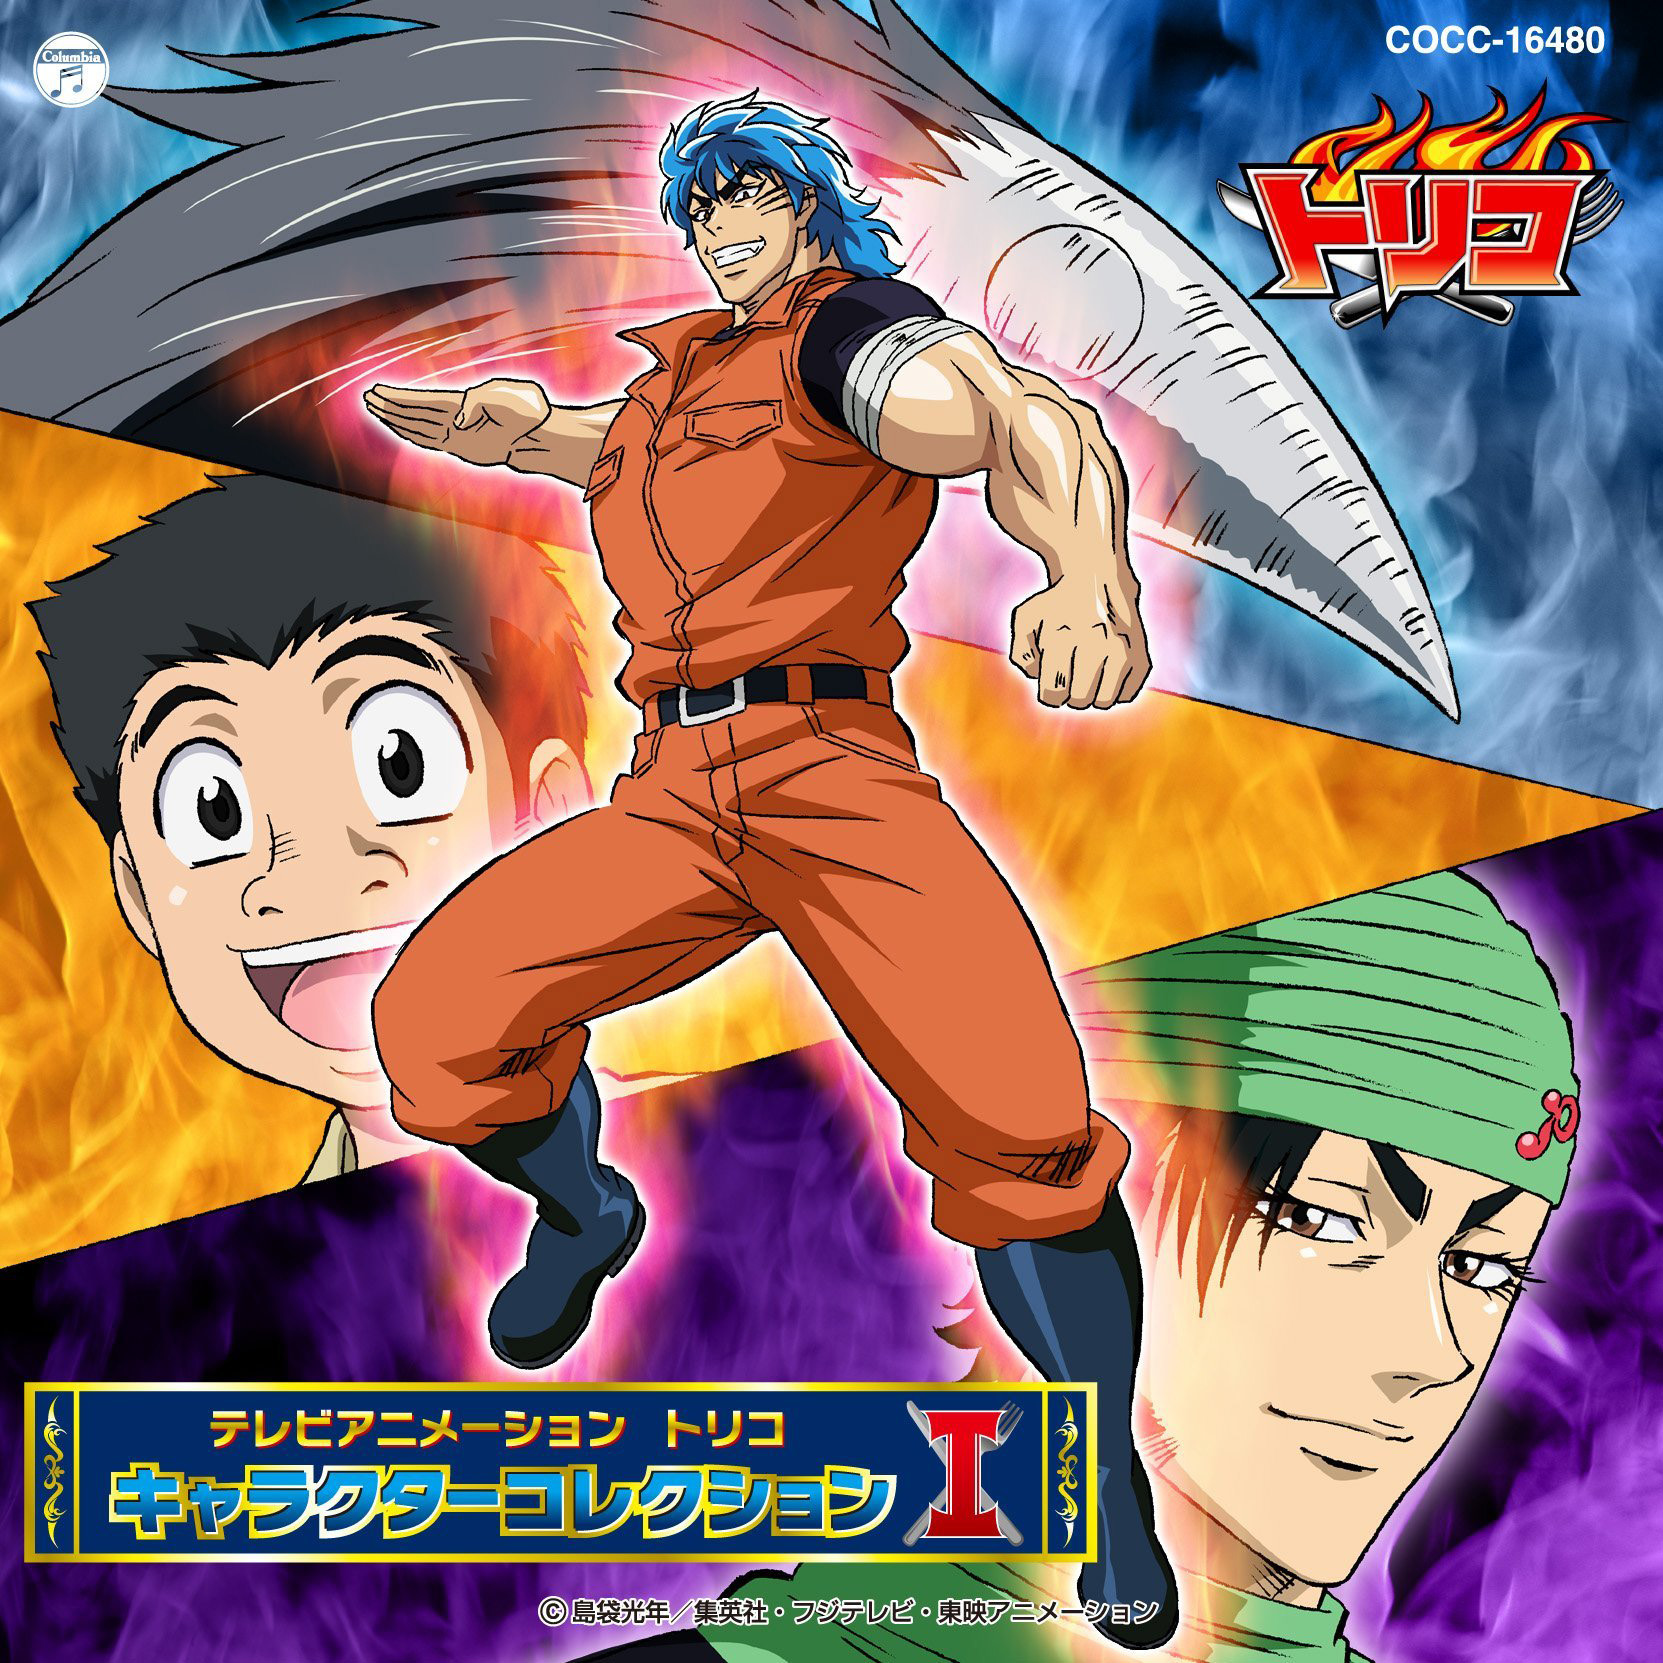 Character Collection 1 | Toriko Wiki | FANDOM powered by Wikia